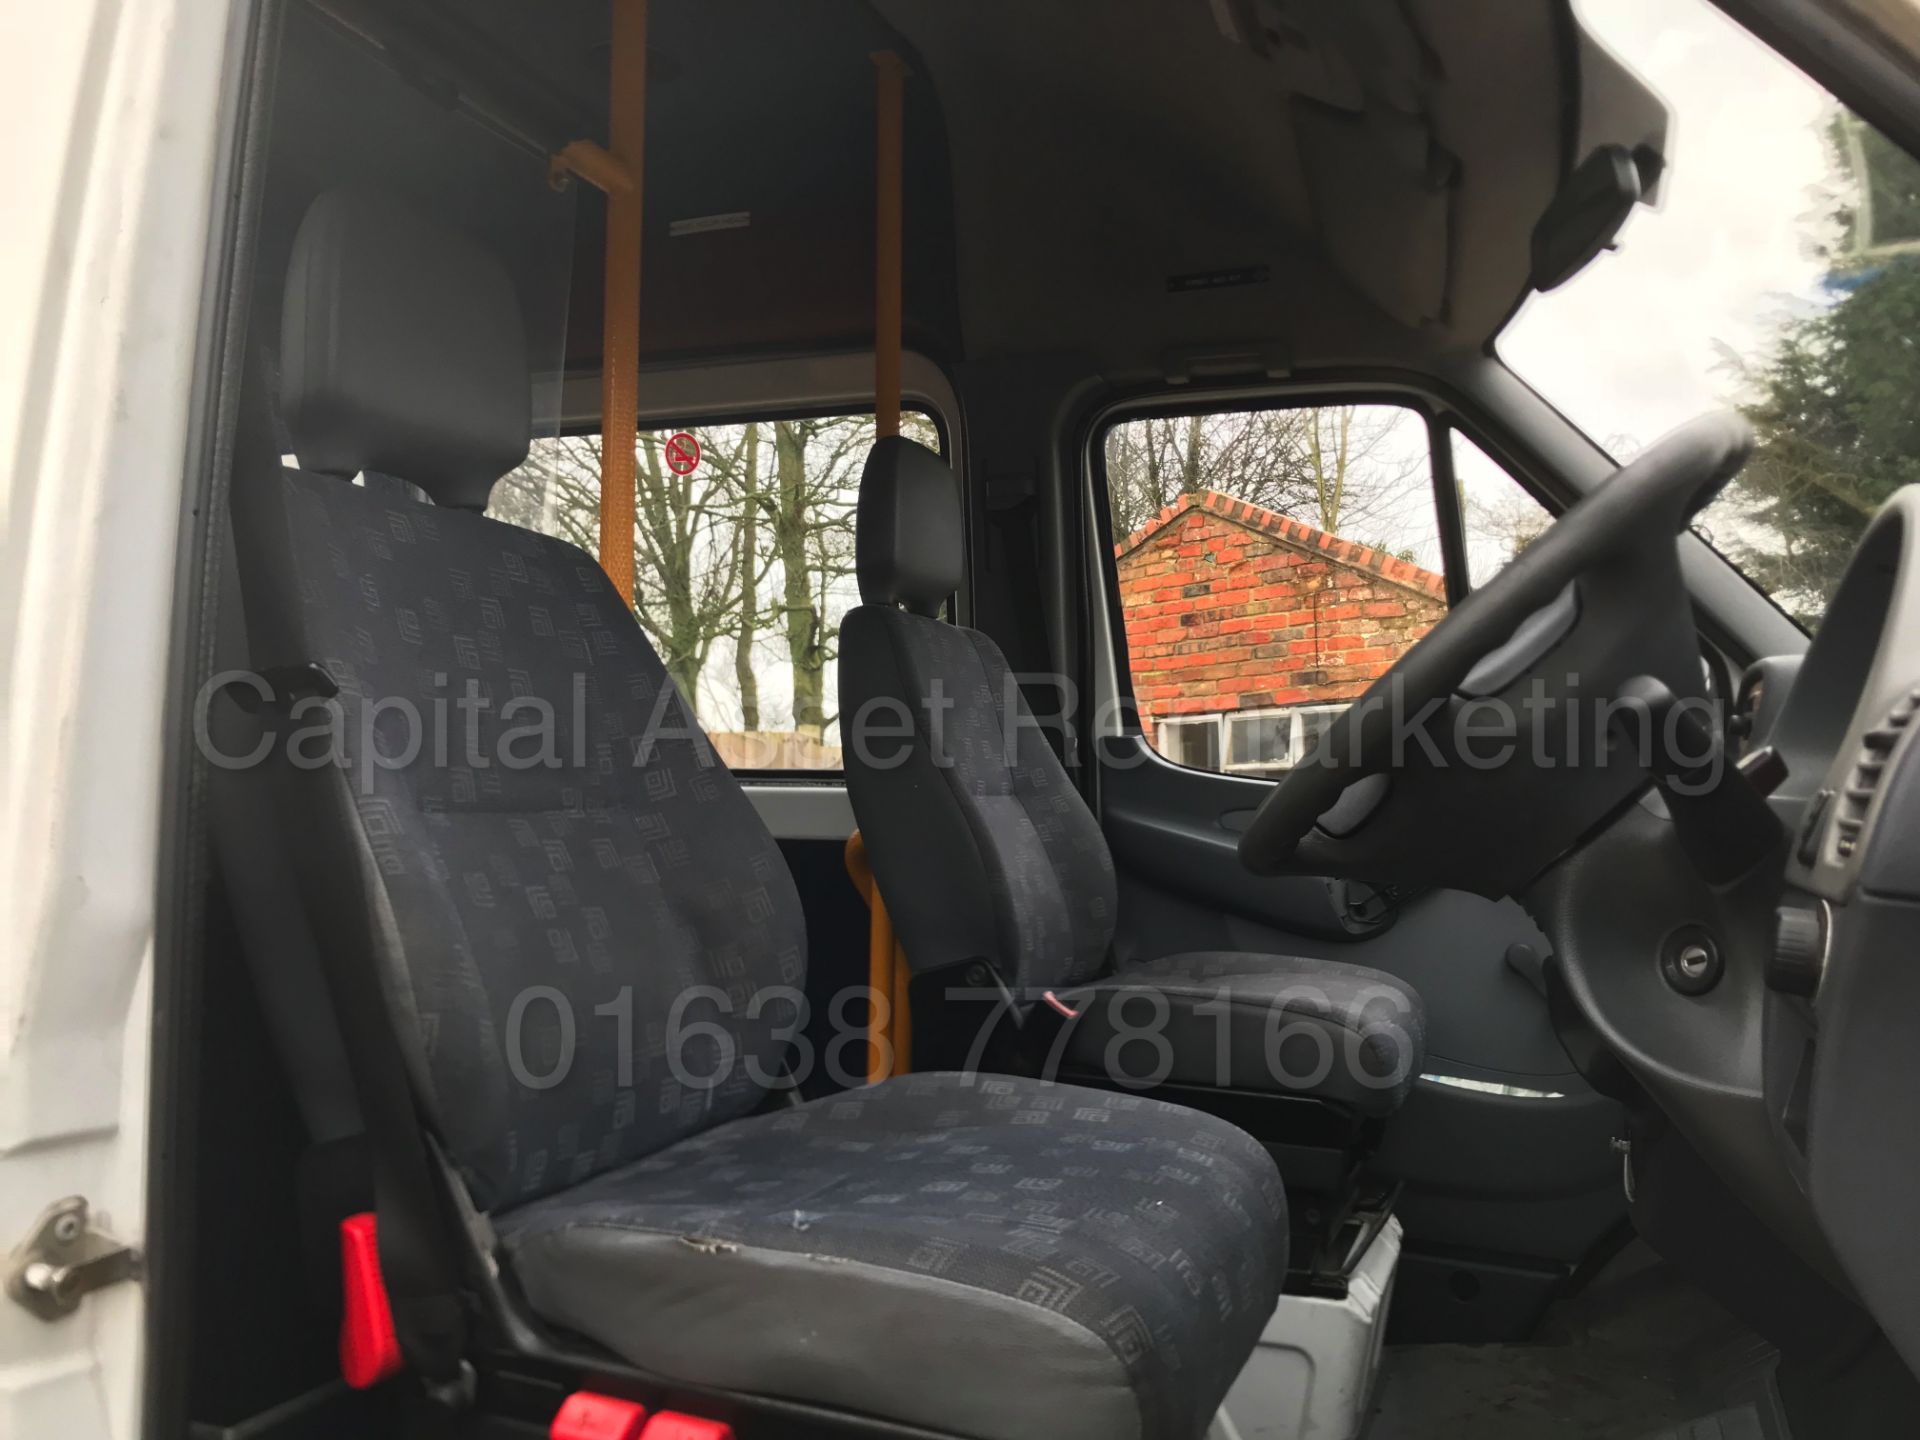 (ON SALE) MERCEDES-BENZ 411 CDI 'LWB - 16 SEATER MINI-BUS' (2004 MODEL) 'COACH INTERIOR' WHEEL CHAIR - Image 20 of 25